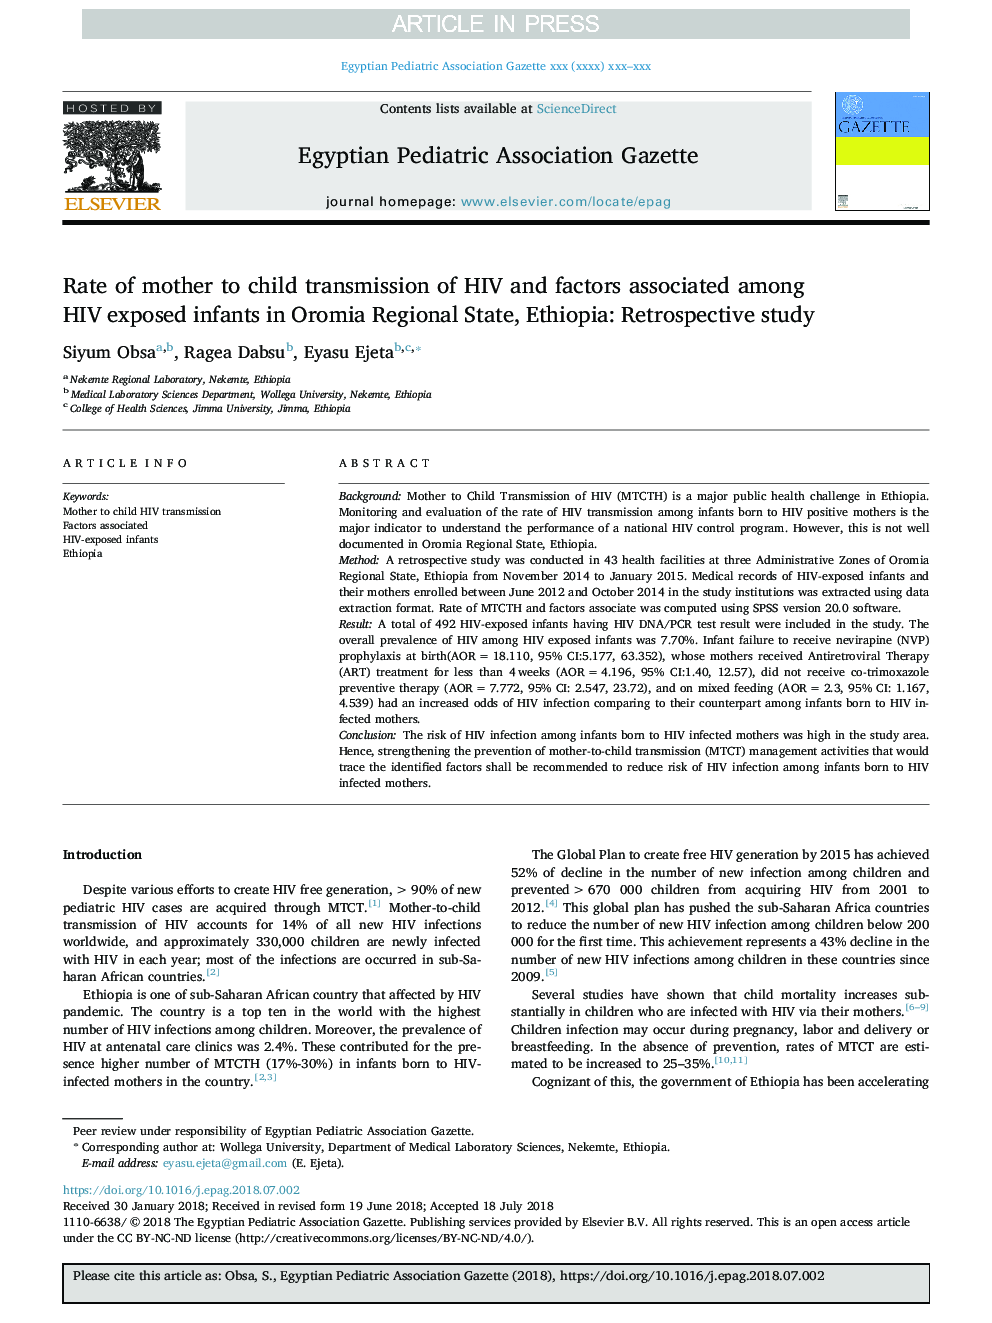 Rate of mother to child transmission of HIV and factors associated among HIV exposed infants in Oromia Regional State, Ethiopia: Retrospective study